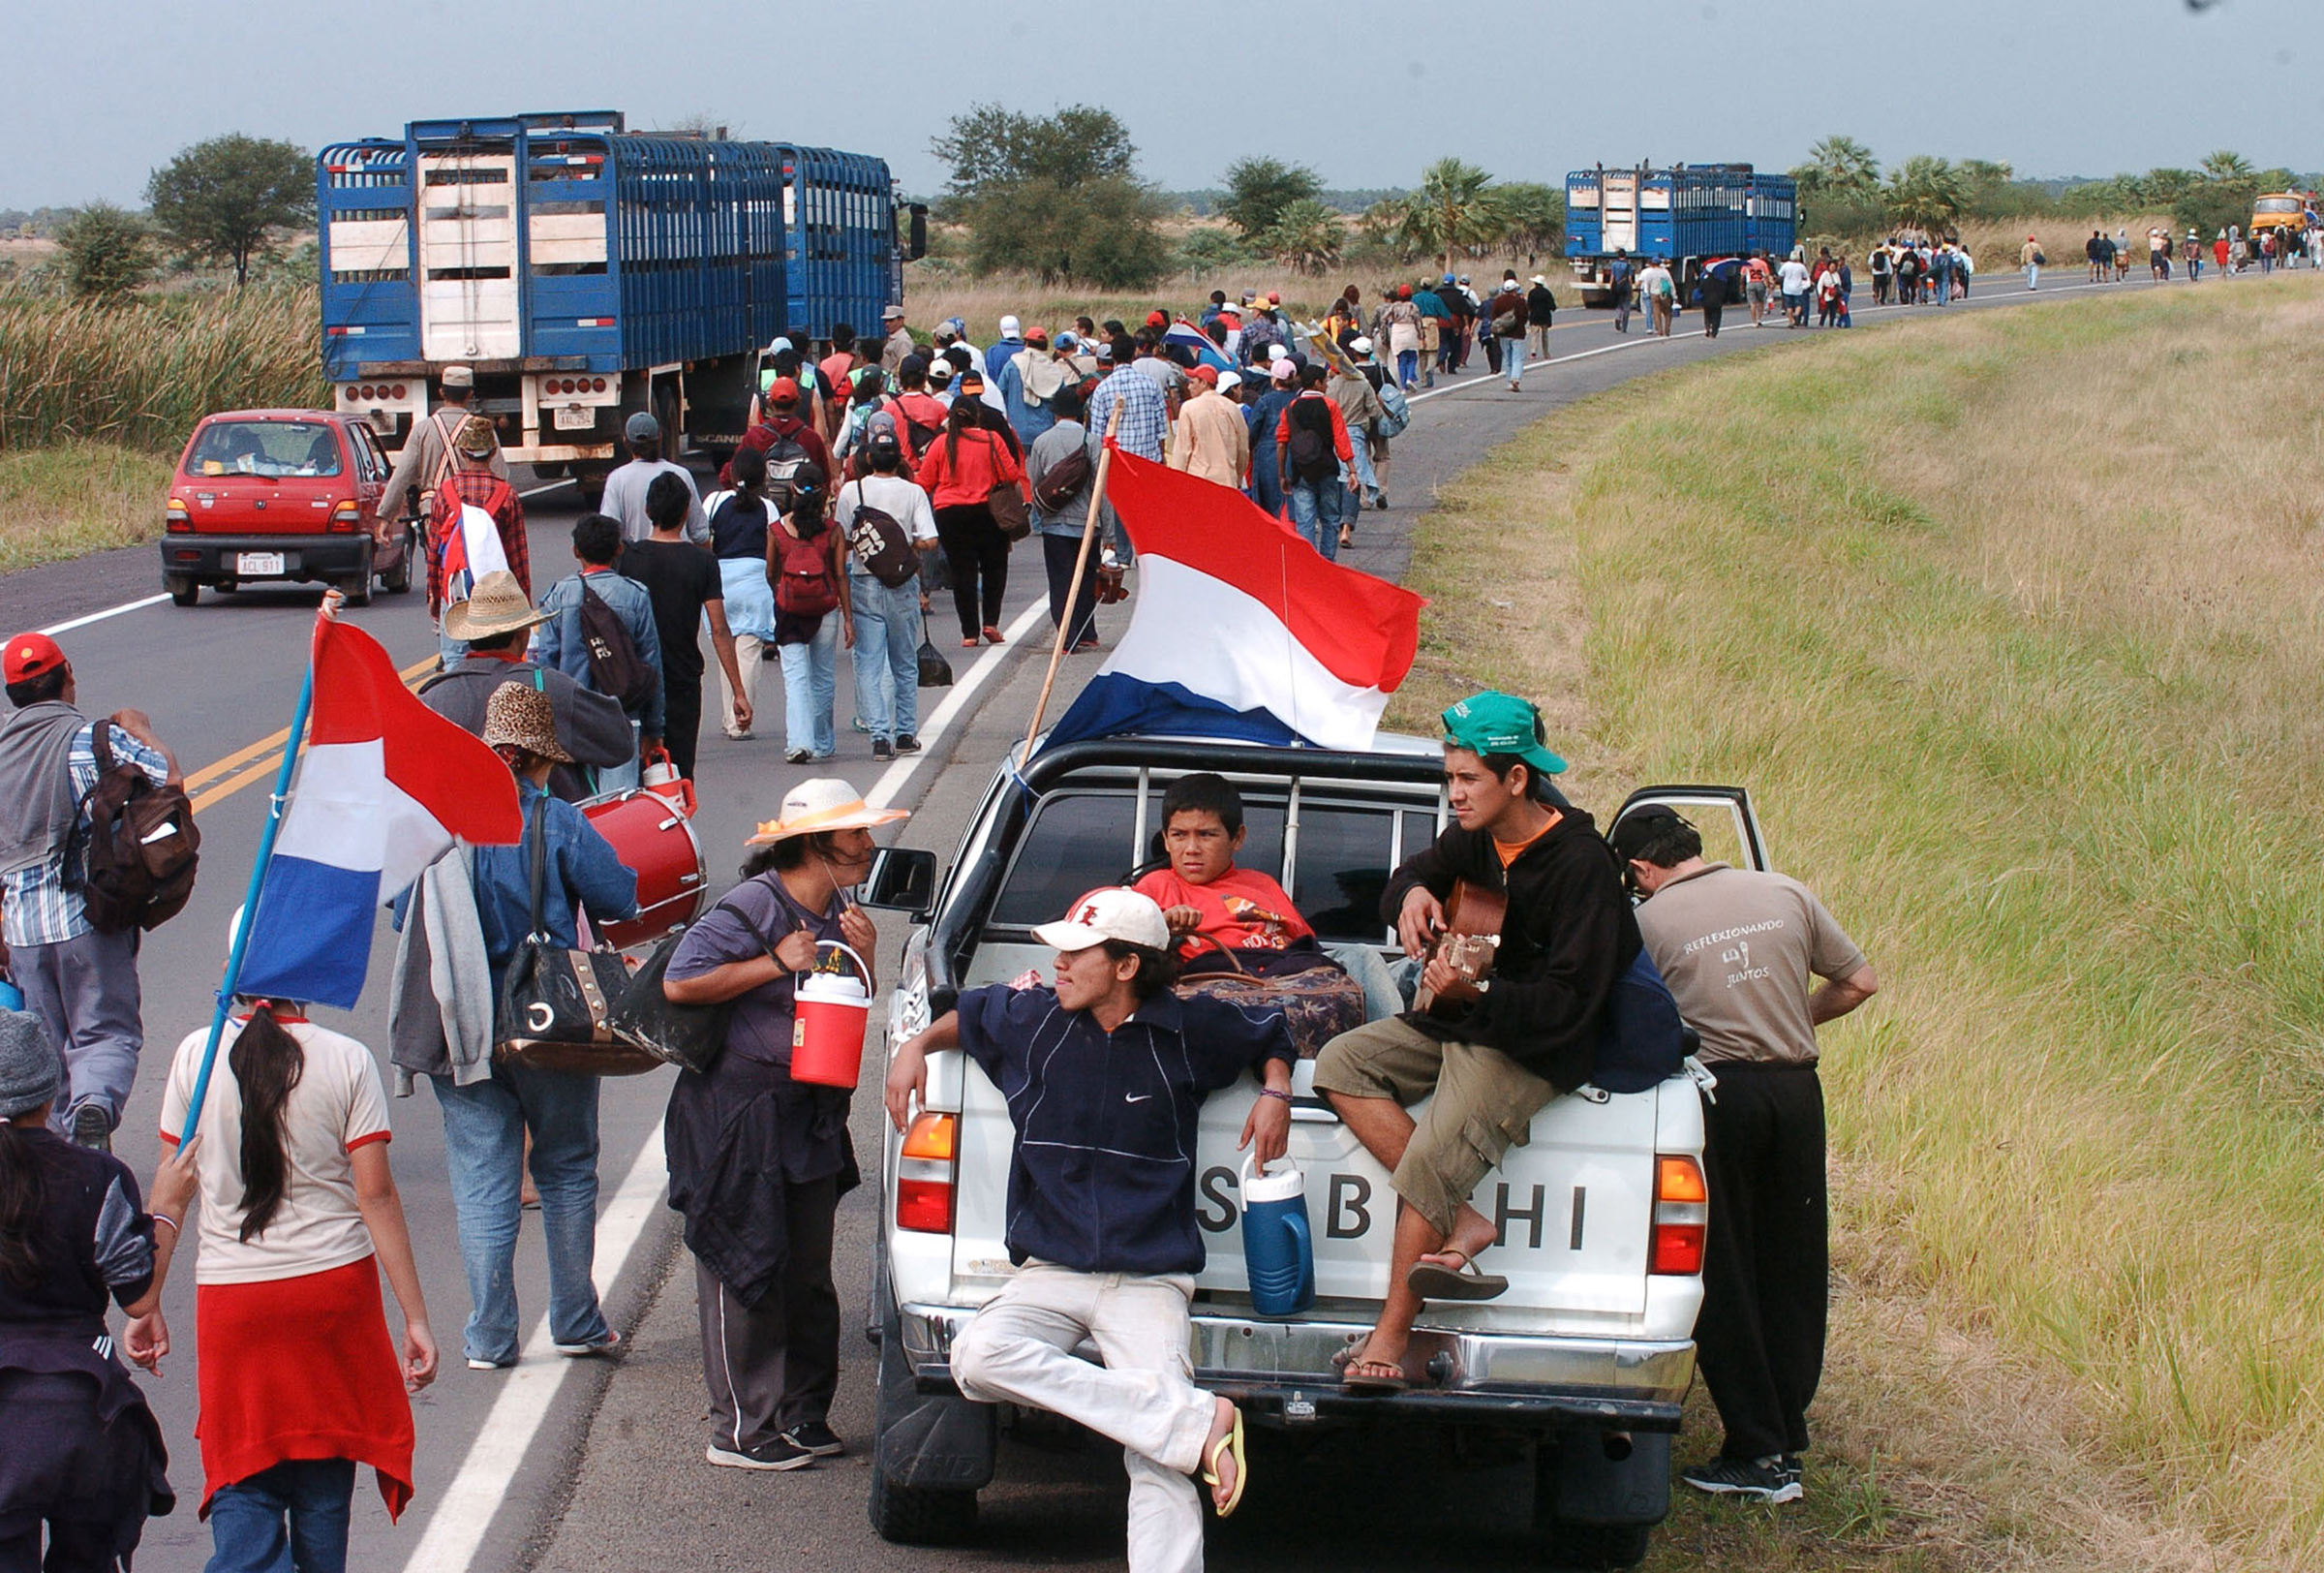 Paraguayans from the town of Puerto Casado take part in a 148km (91 miles) march from their homes towards Asuncion, the capital, to pressure the government to turn some of the land, acquired in their region by the Unification Church of Reverend Moon, over to them for subsistence farming, in Tacuara, Paraguay, on July 16, 2005.